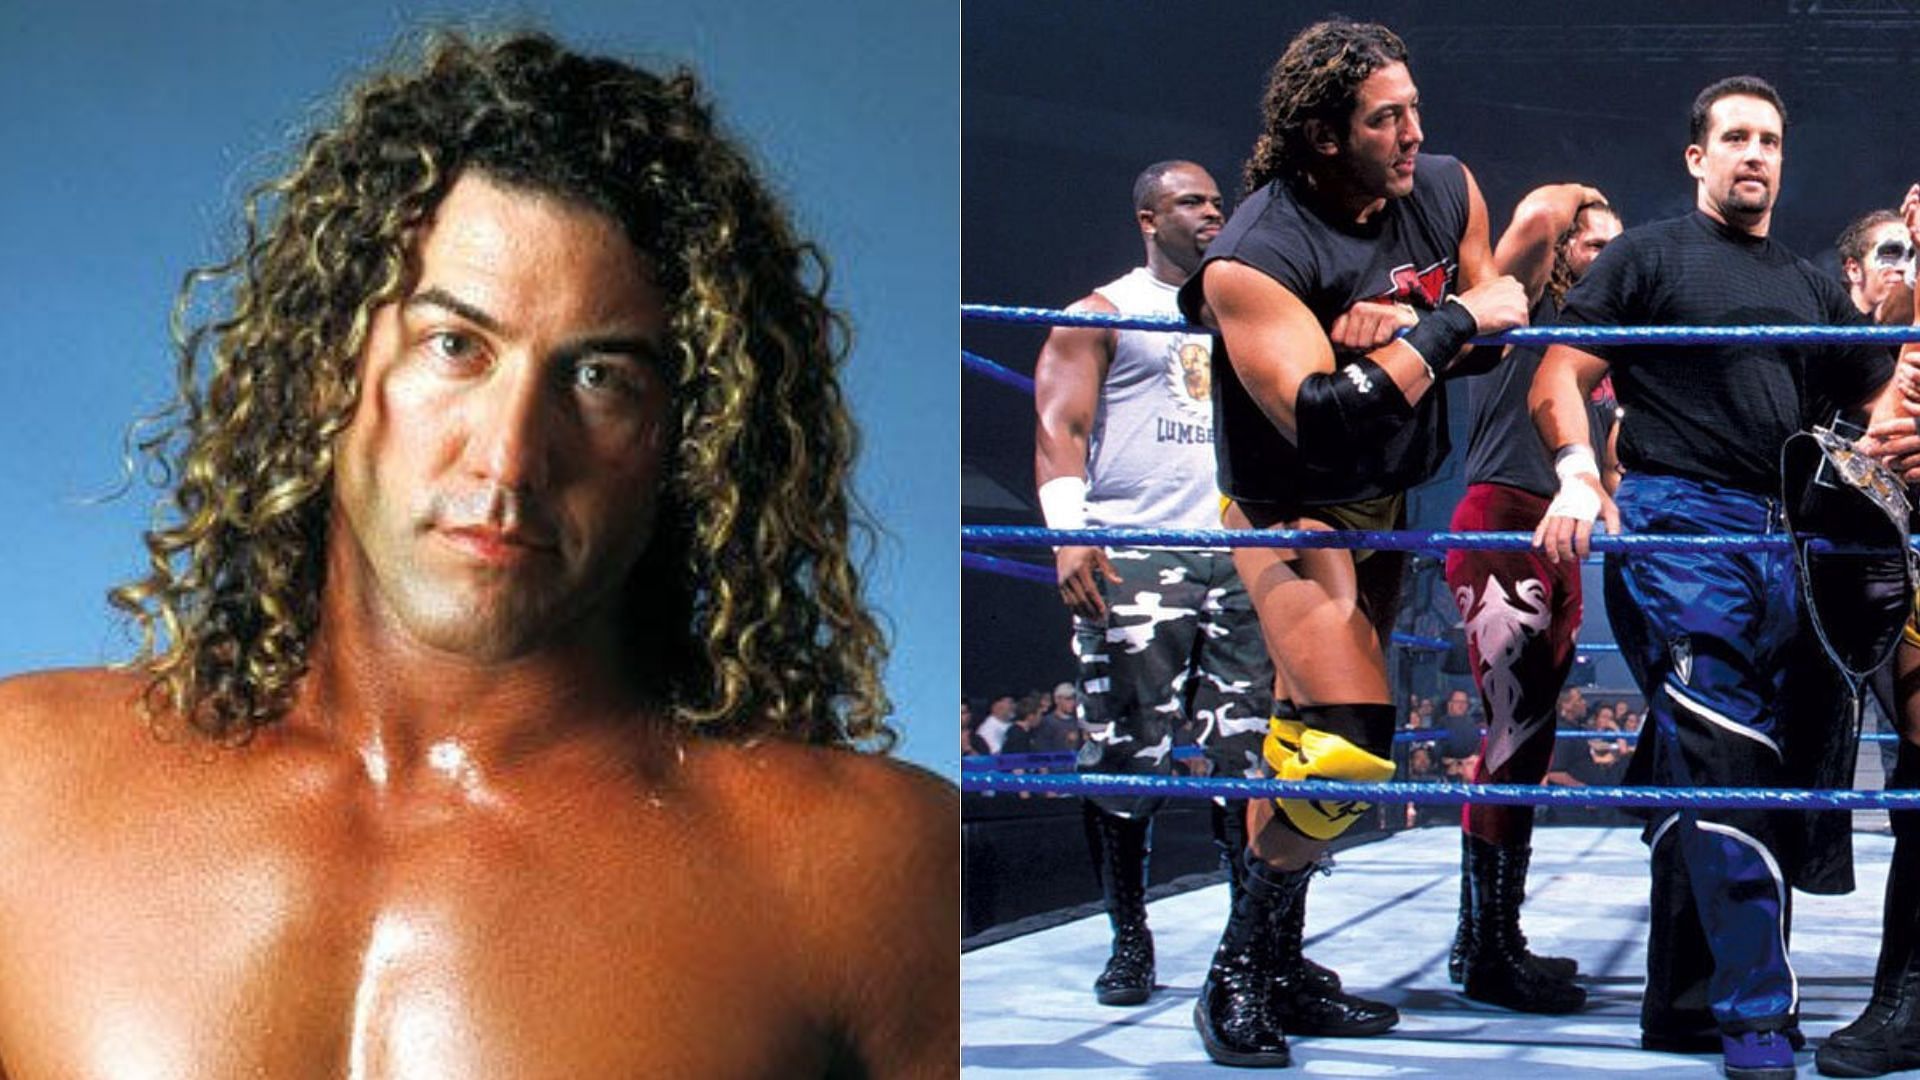 Chuck Palumbo worked for WWE between 2001-2004 and 2006-2008